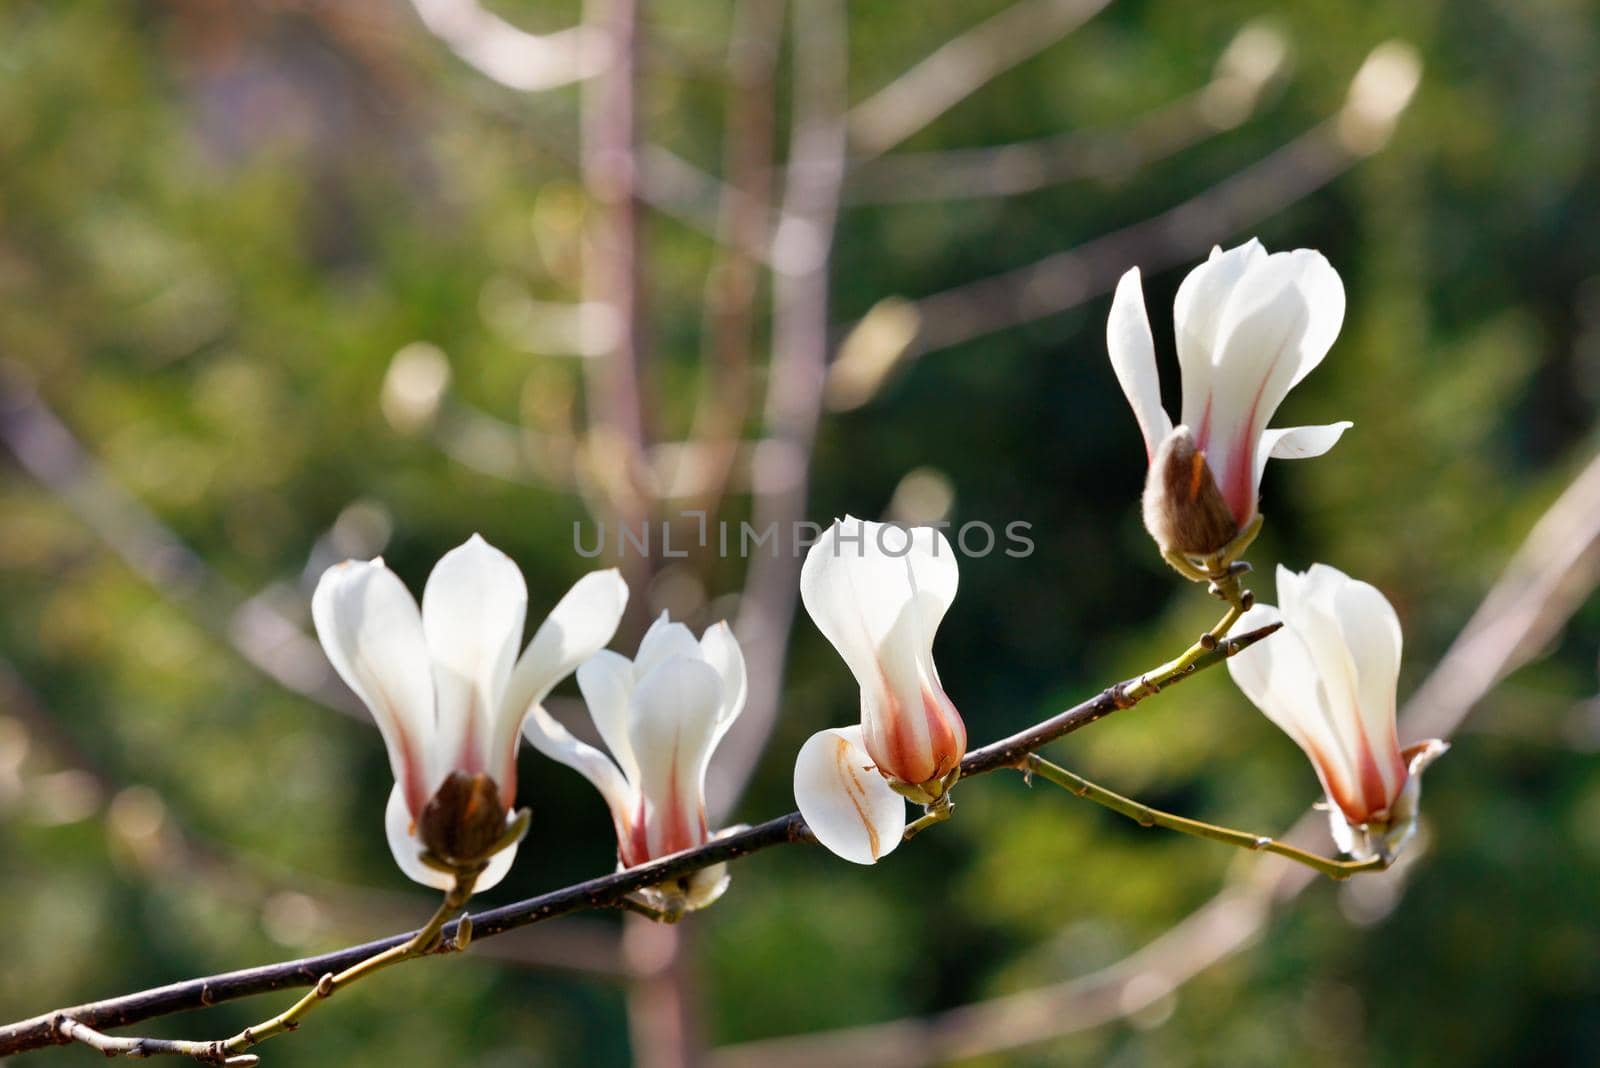 Large white magnolia buds bloom on a graceful branch in early spring sunlight against a soft background close-up. Copy space.